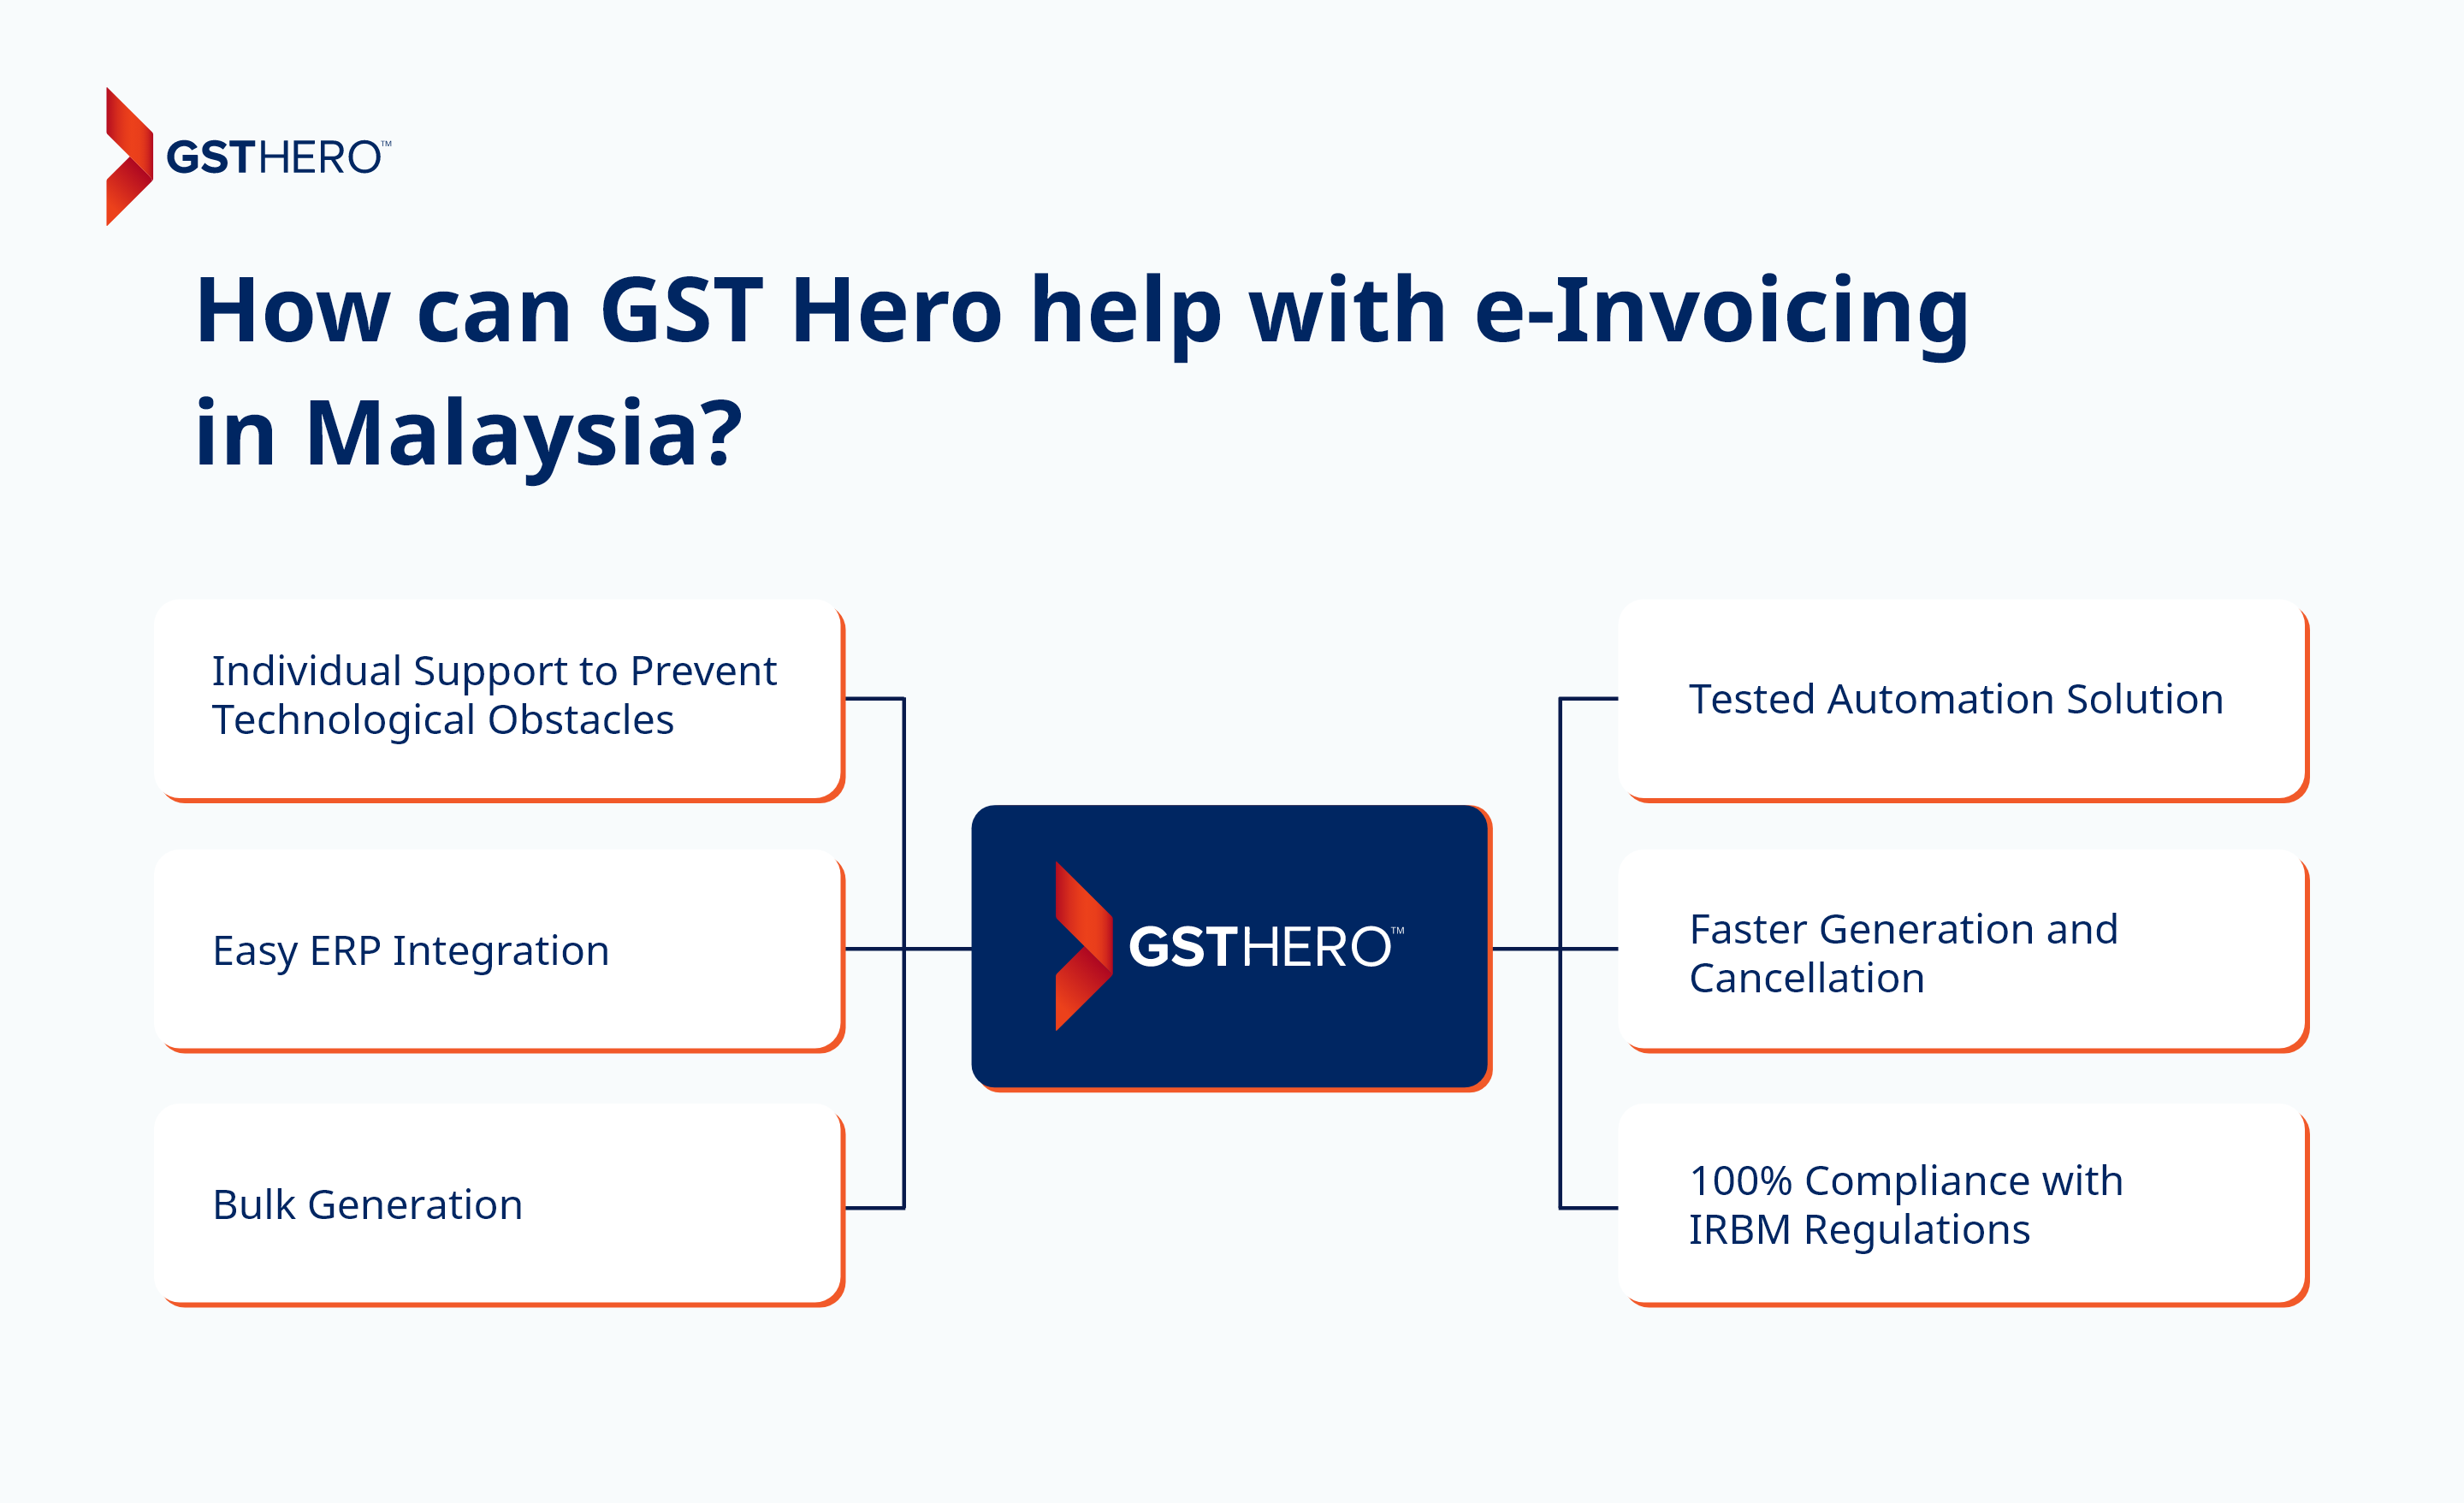 How can GST Hero help with e-Invoicing in Malaysia